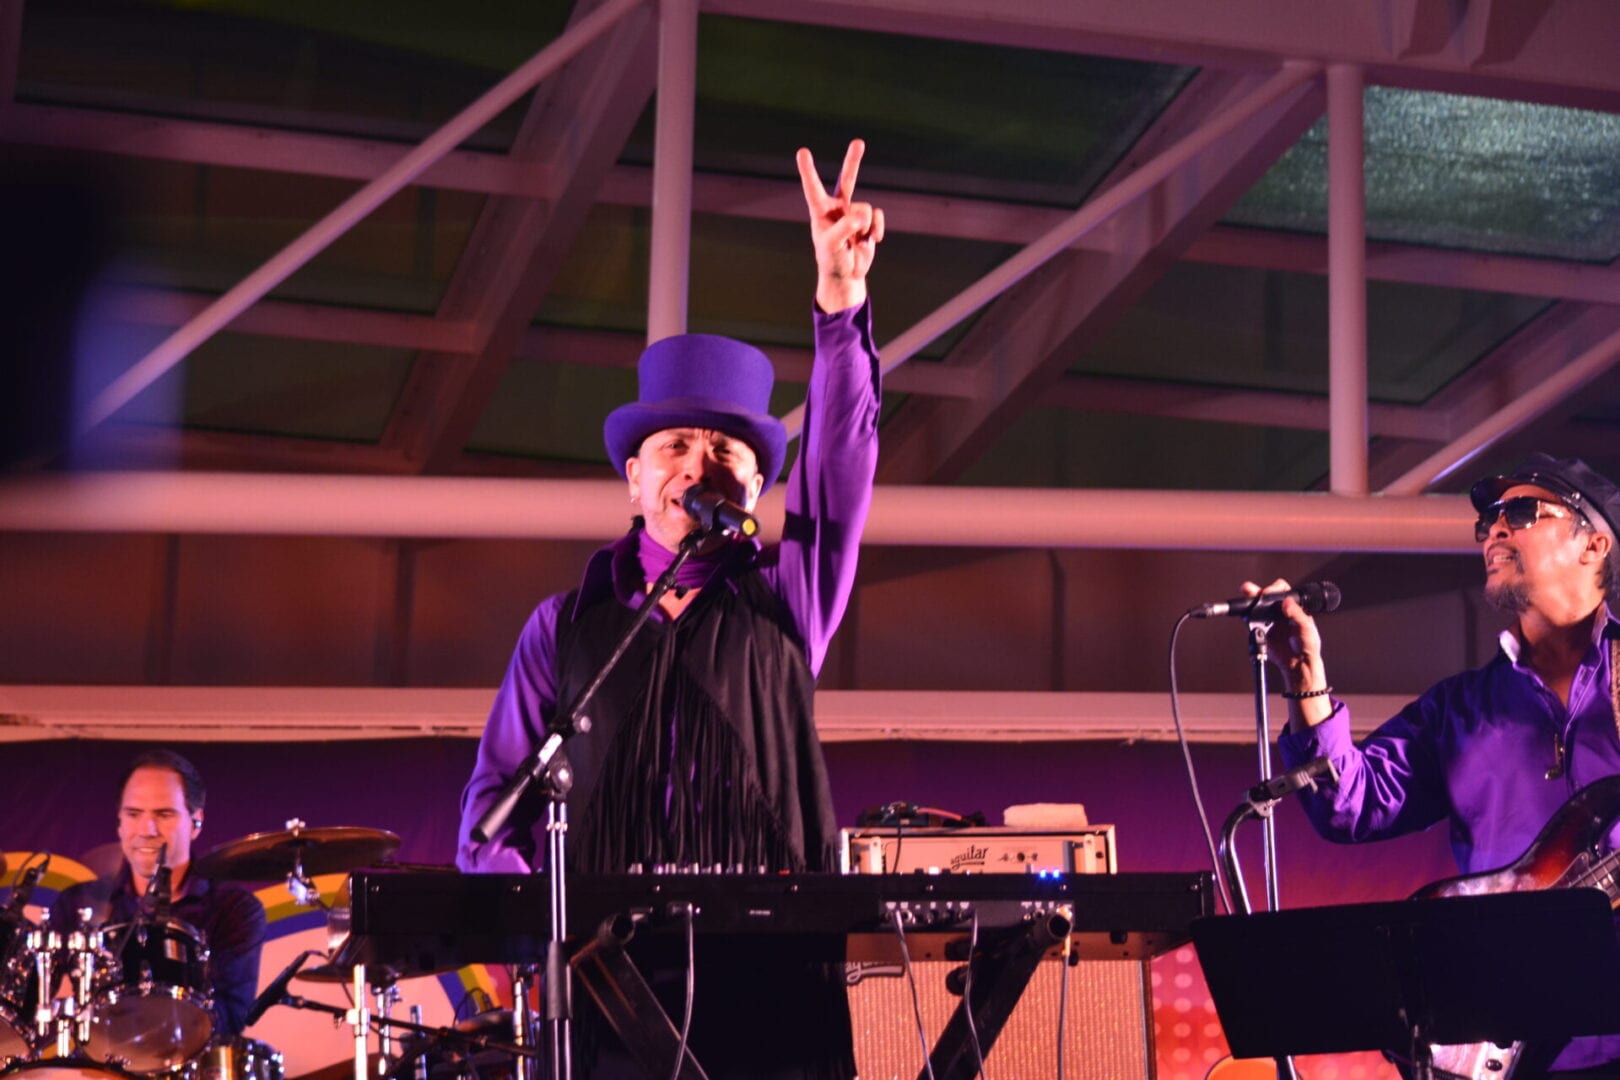 A man in purple shirt and hat holding up peace sign.